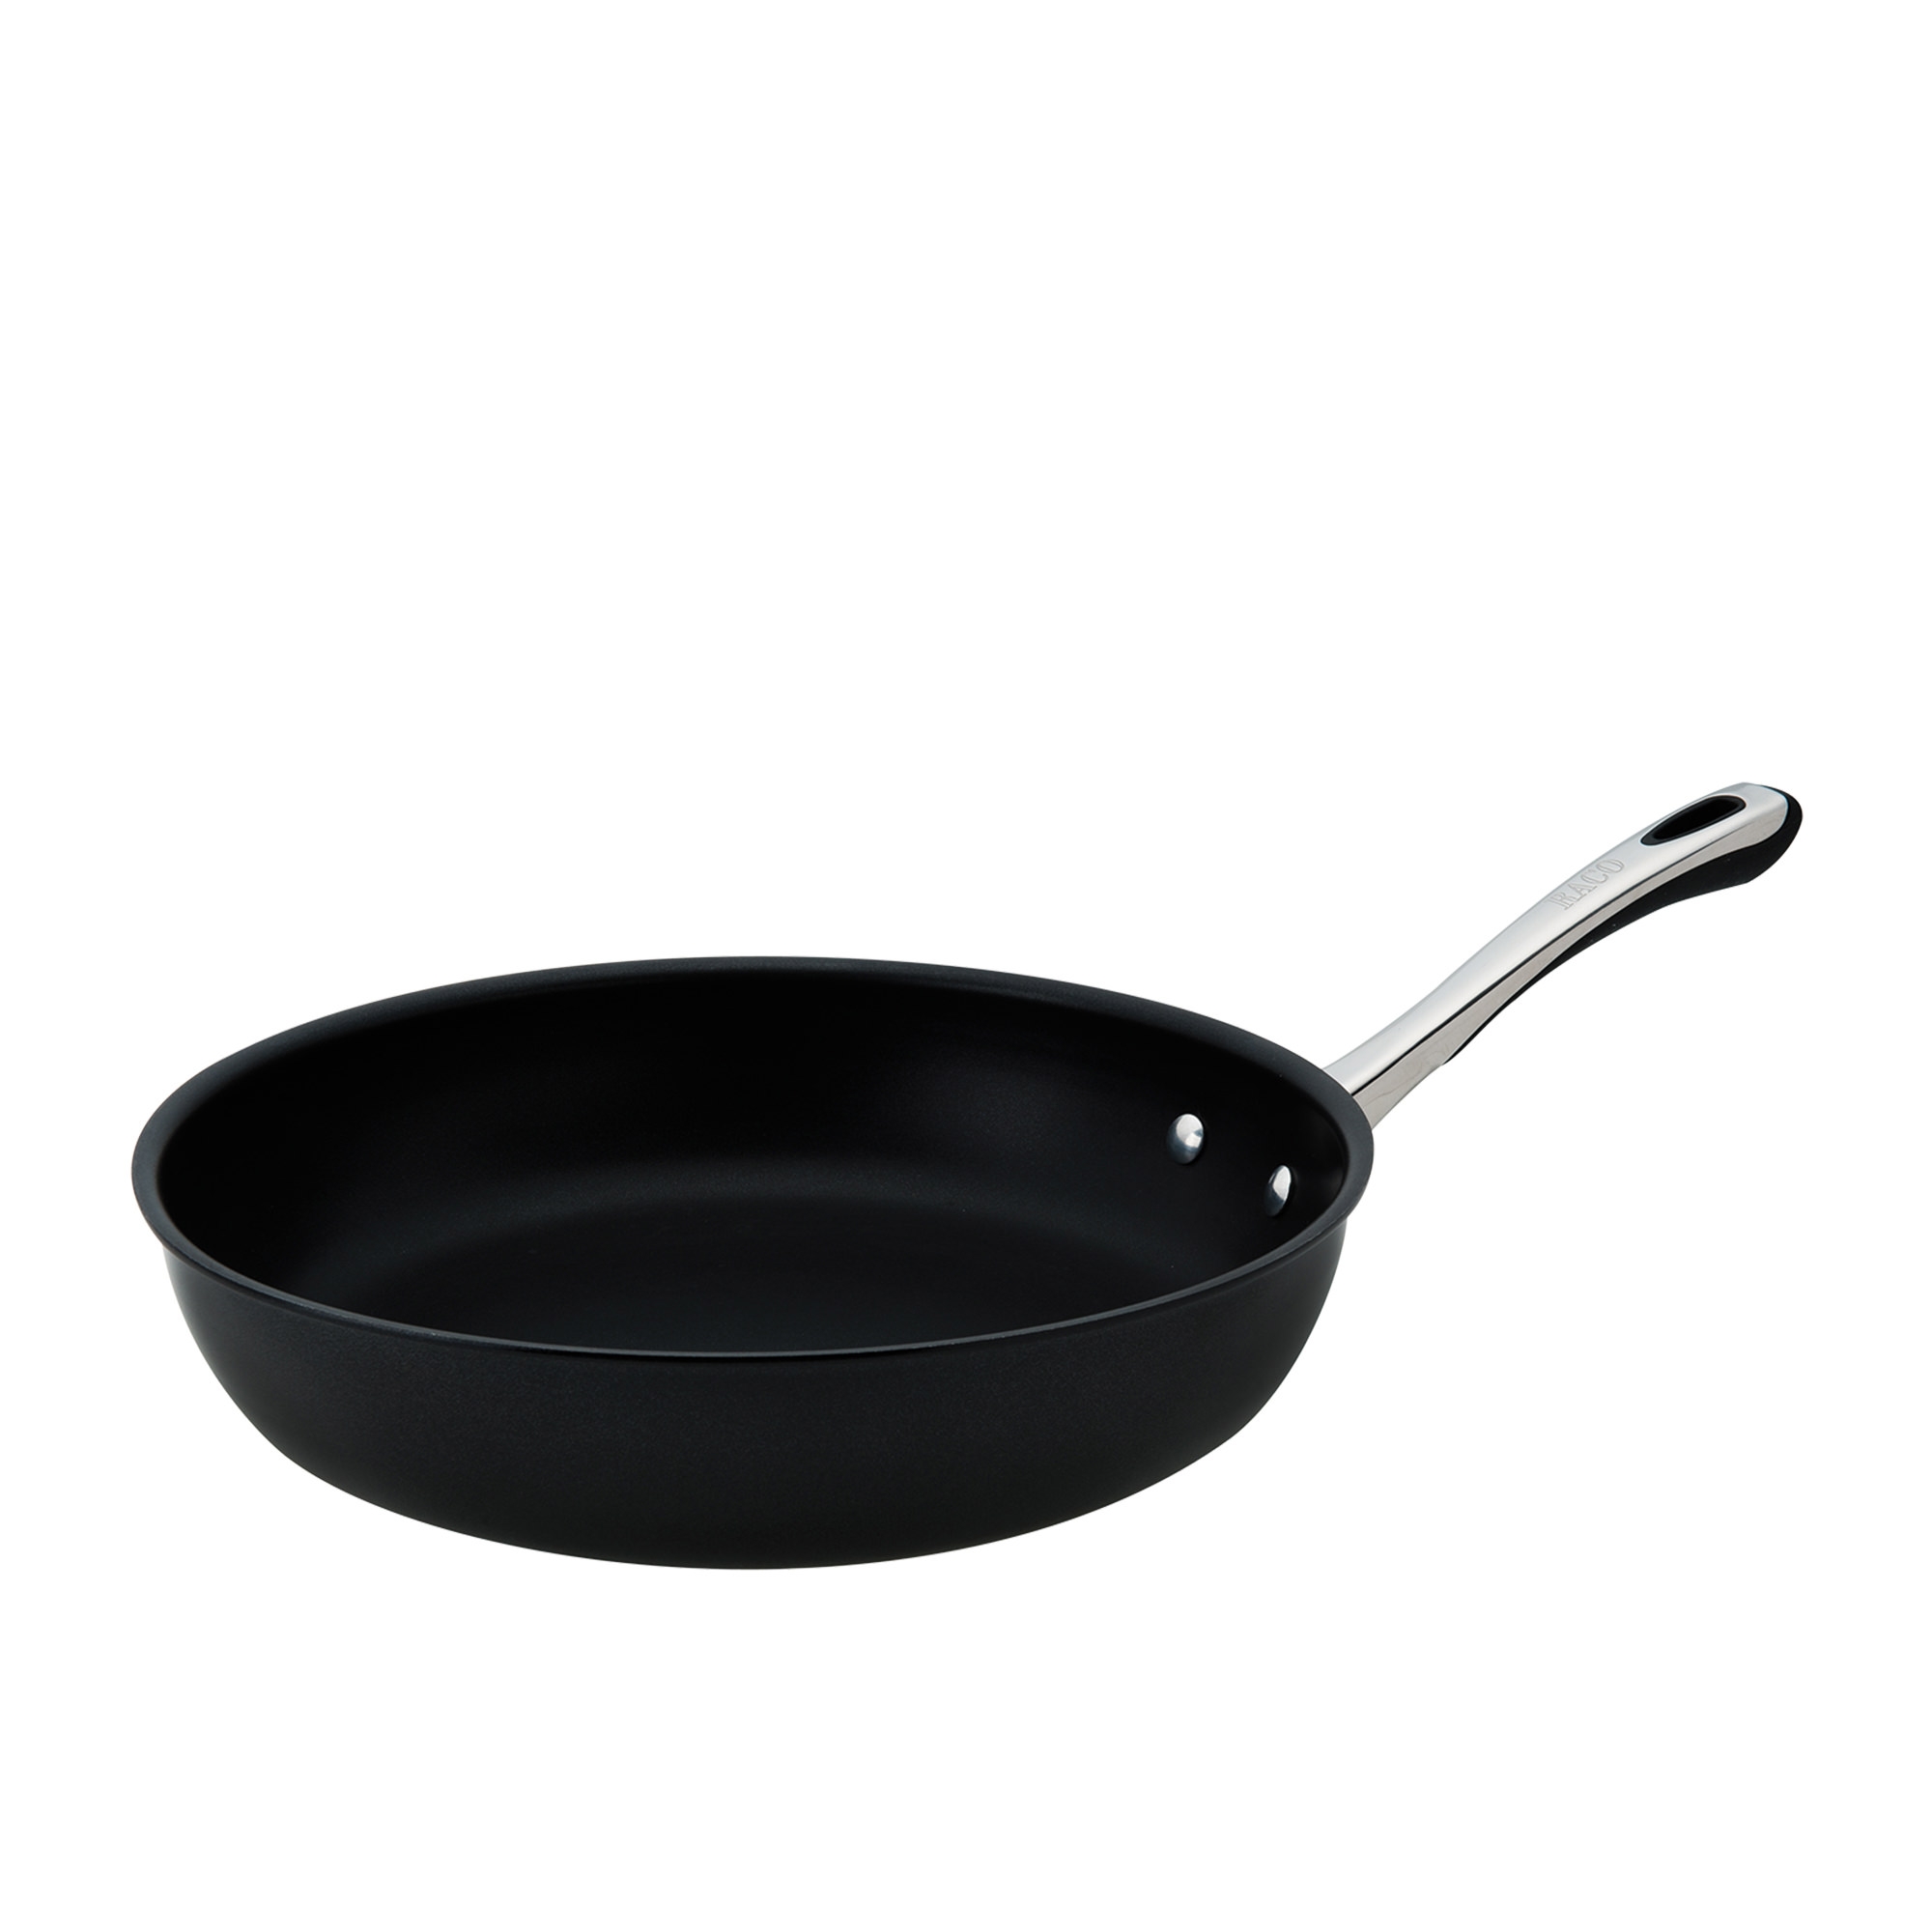 Raco Contemporary French Skillet 30cm Image 1